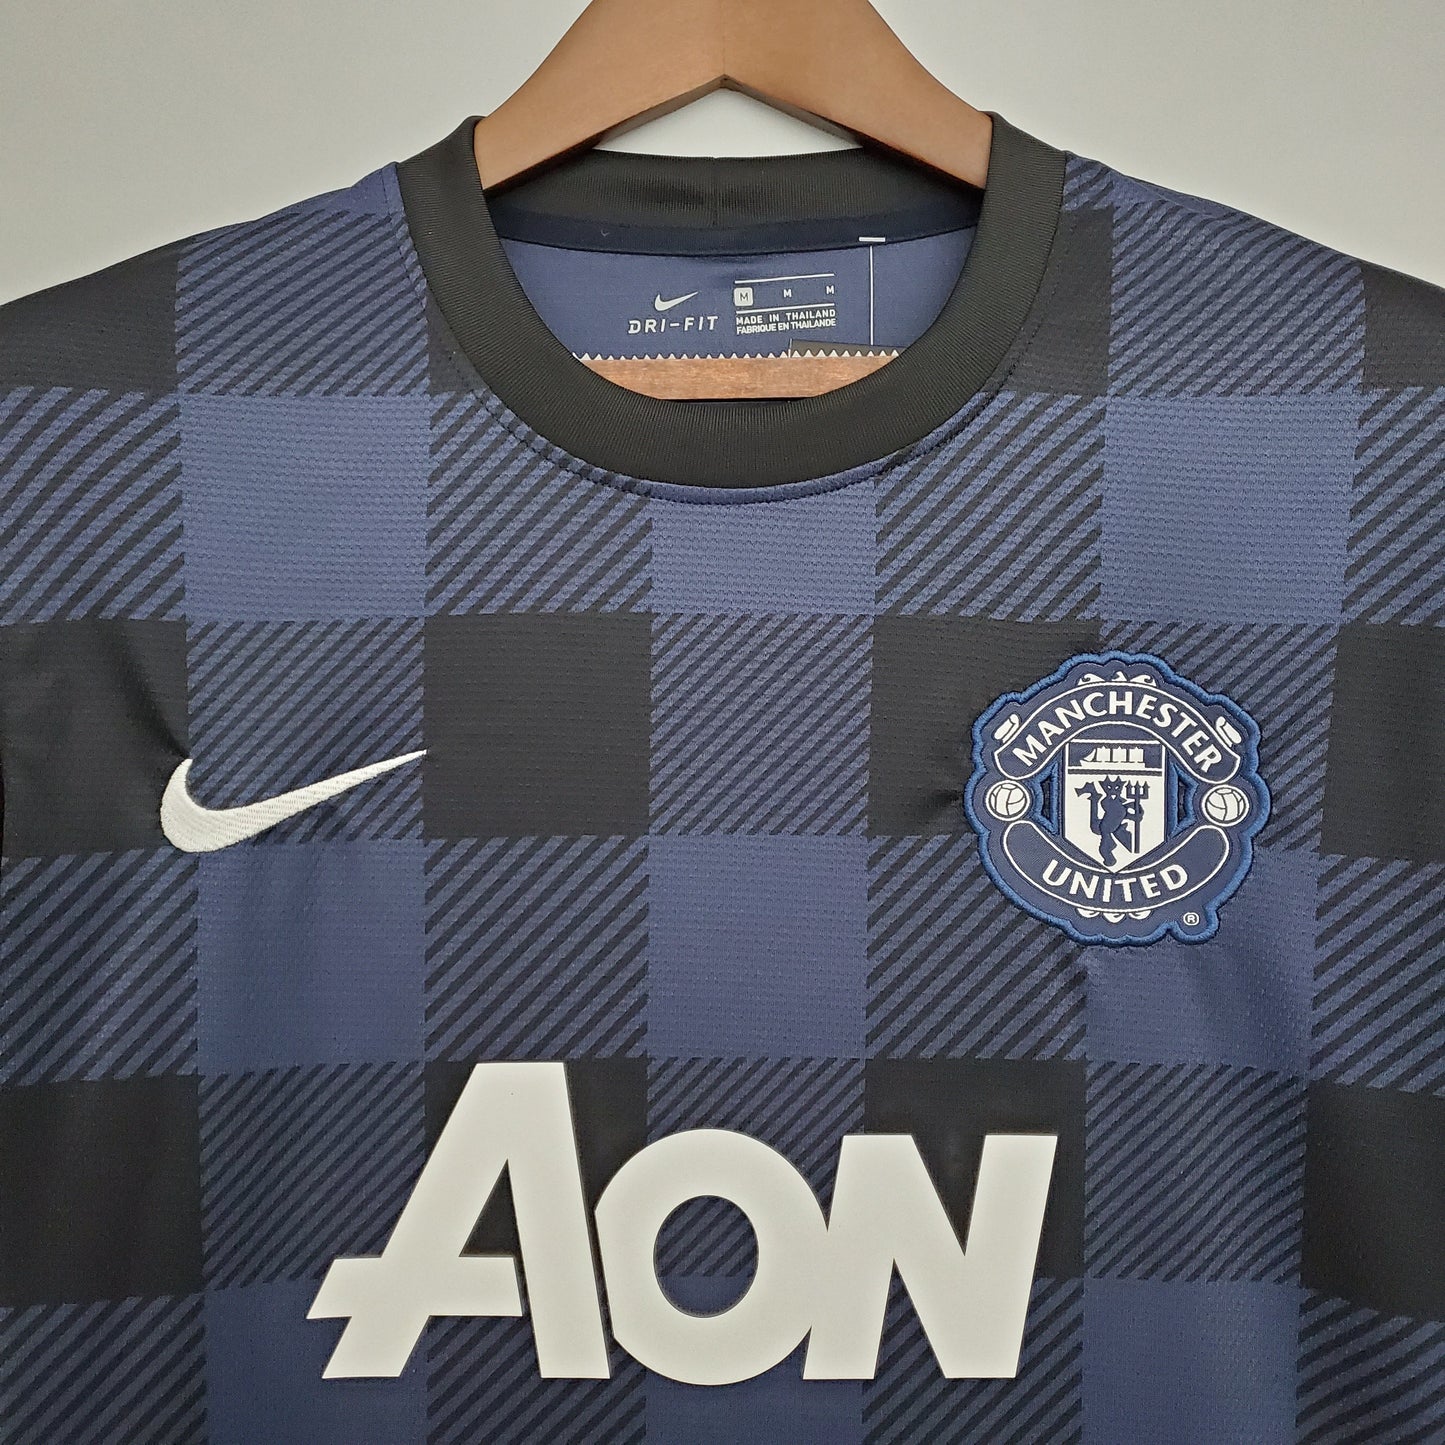 MANCHESTER UNITED 2013 - 2014 AWAY JERSEY